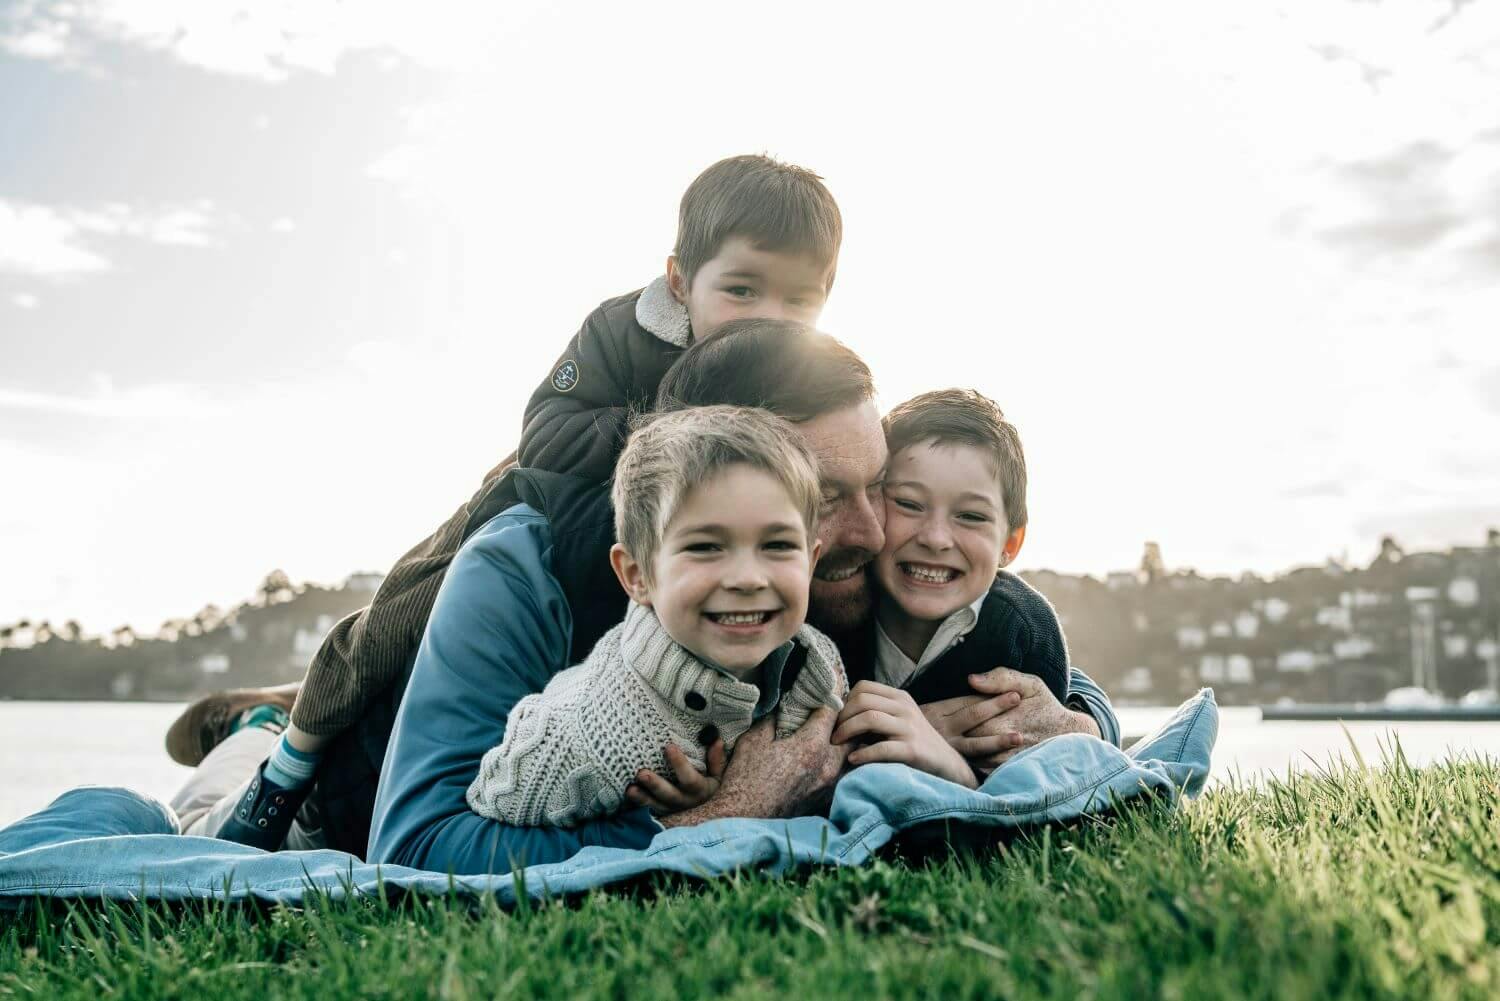 Three children piled on top of an adult, lying on grass in a park